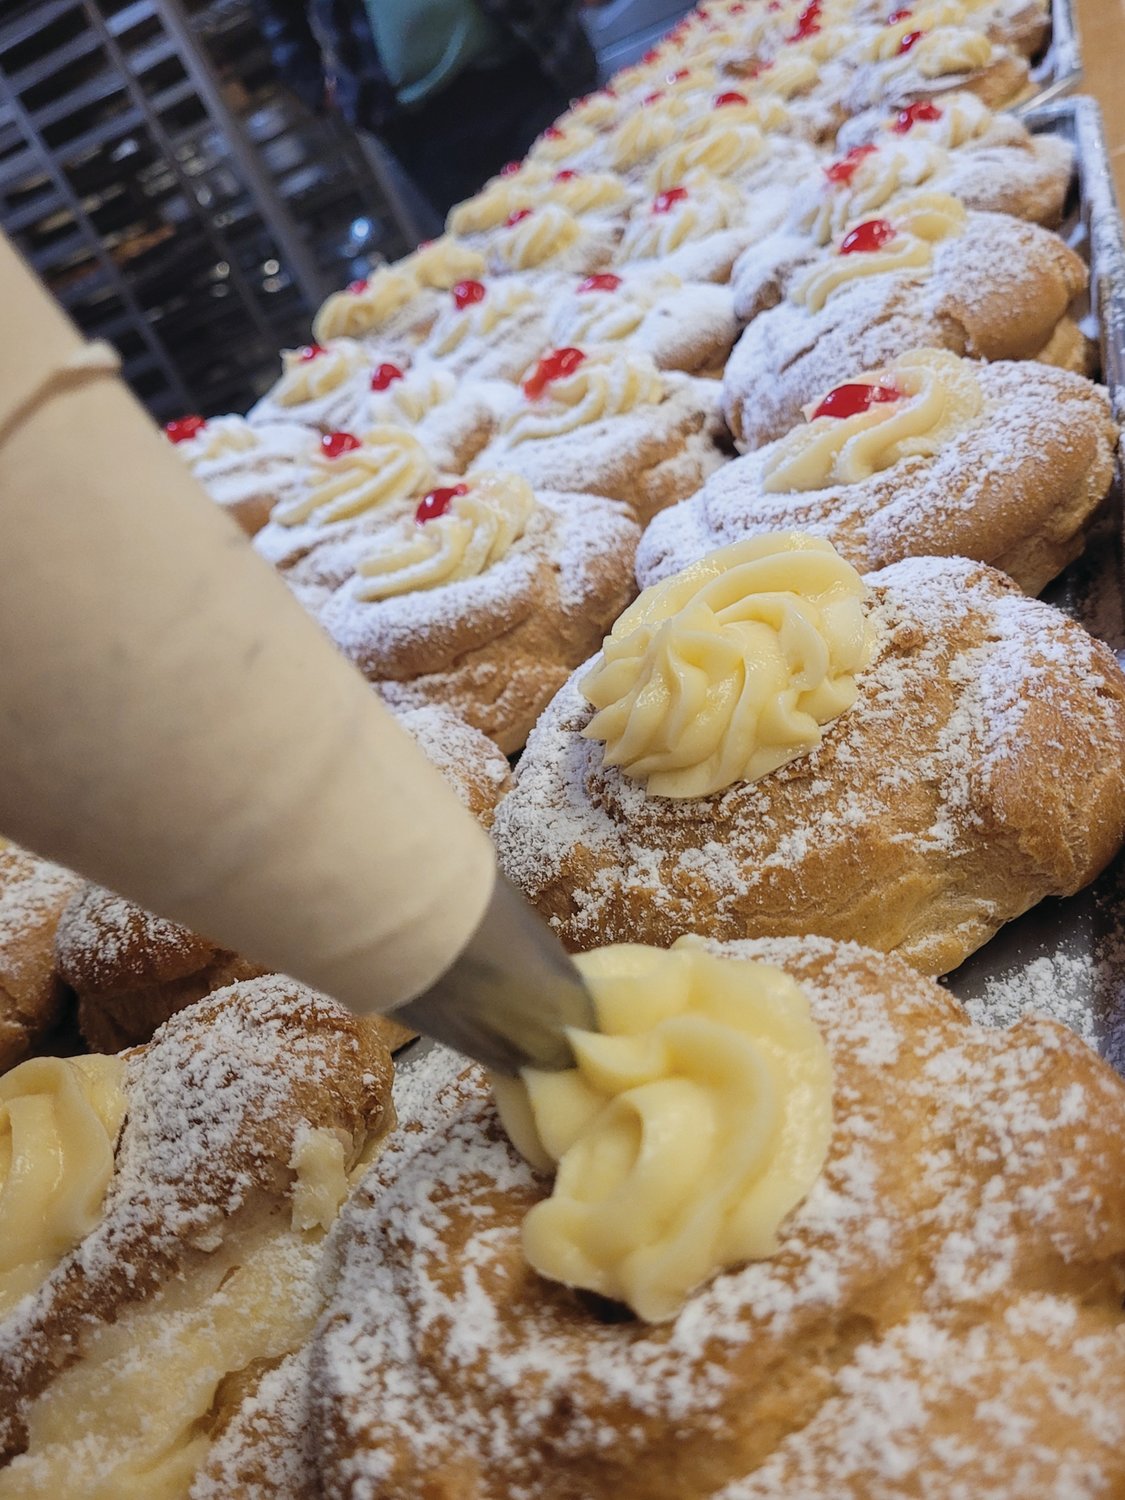 BEST ZEPPOLES WINNERS: The readers of the Cranston Herald, Warwick Beacon and Johnston Sun Rise have voted Solitro’s Bakery as the producers of the regions Best Zeppoles in Beacon Communications inaugural contest.